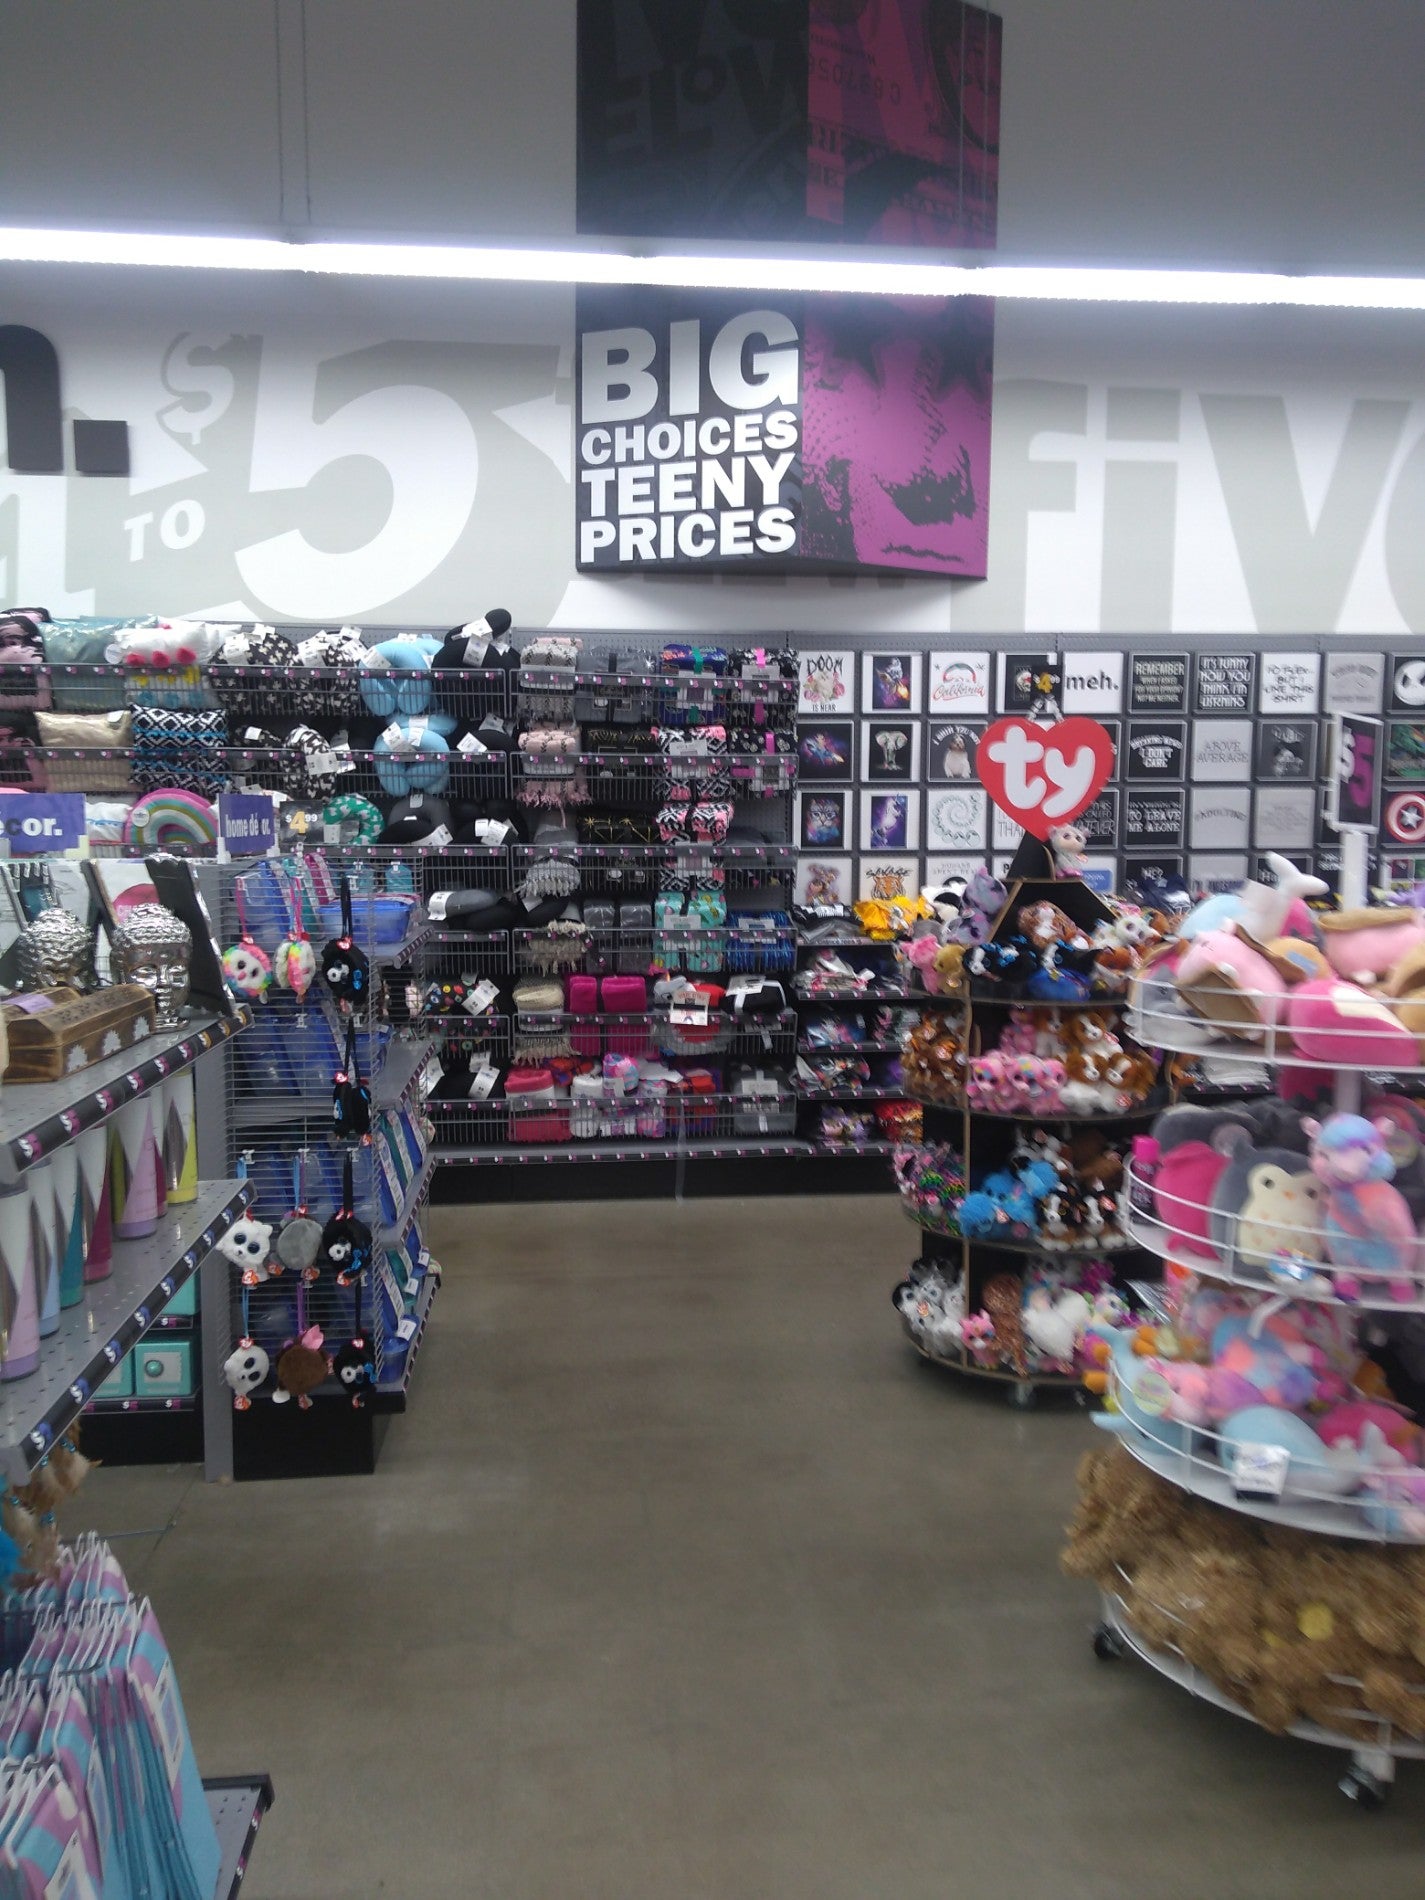 Five Below, 4816 Ridge Rd, Cleveland, OH, Gifts Specialty - MapQuest